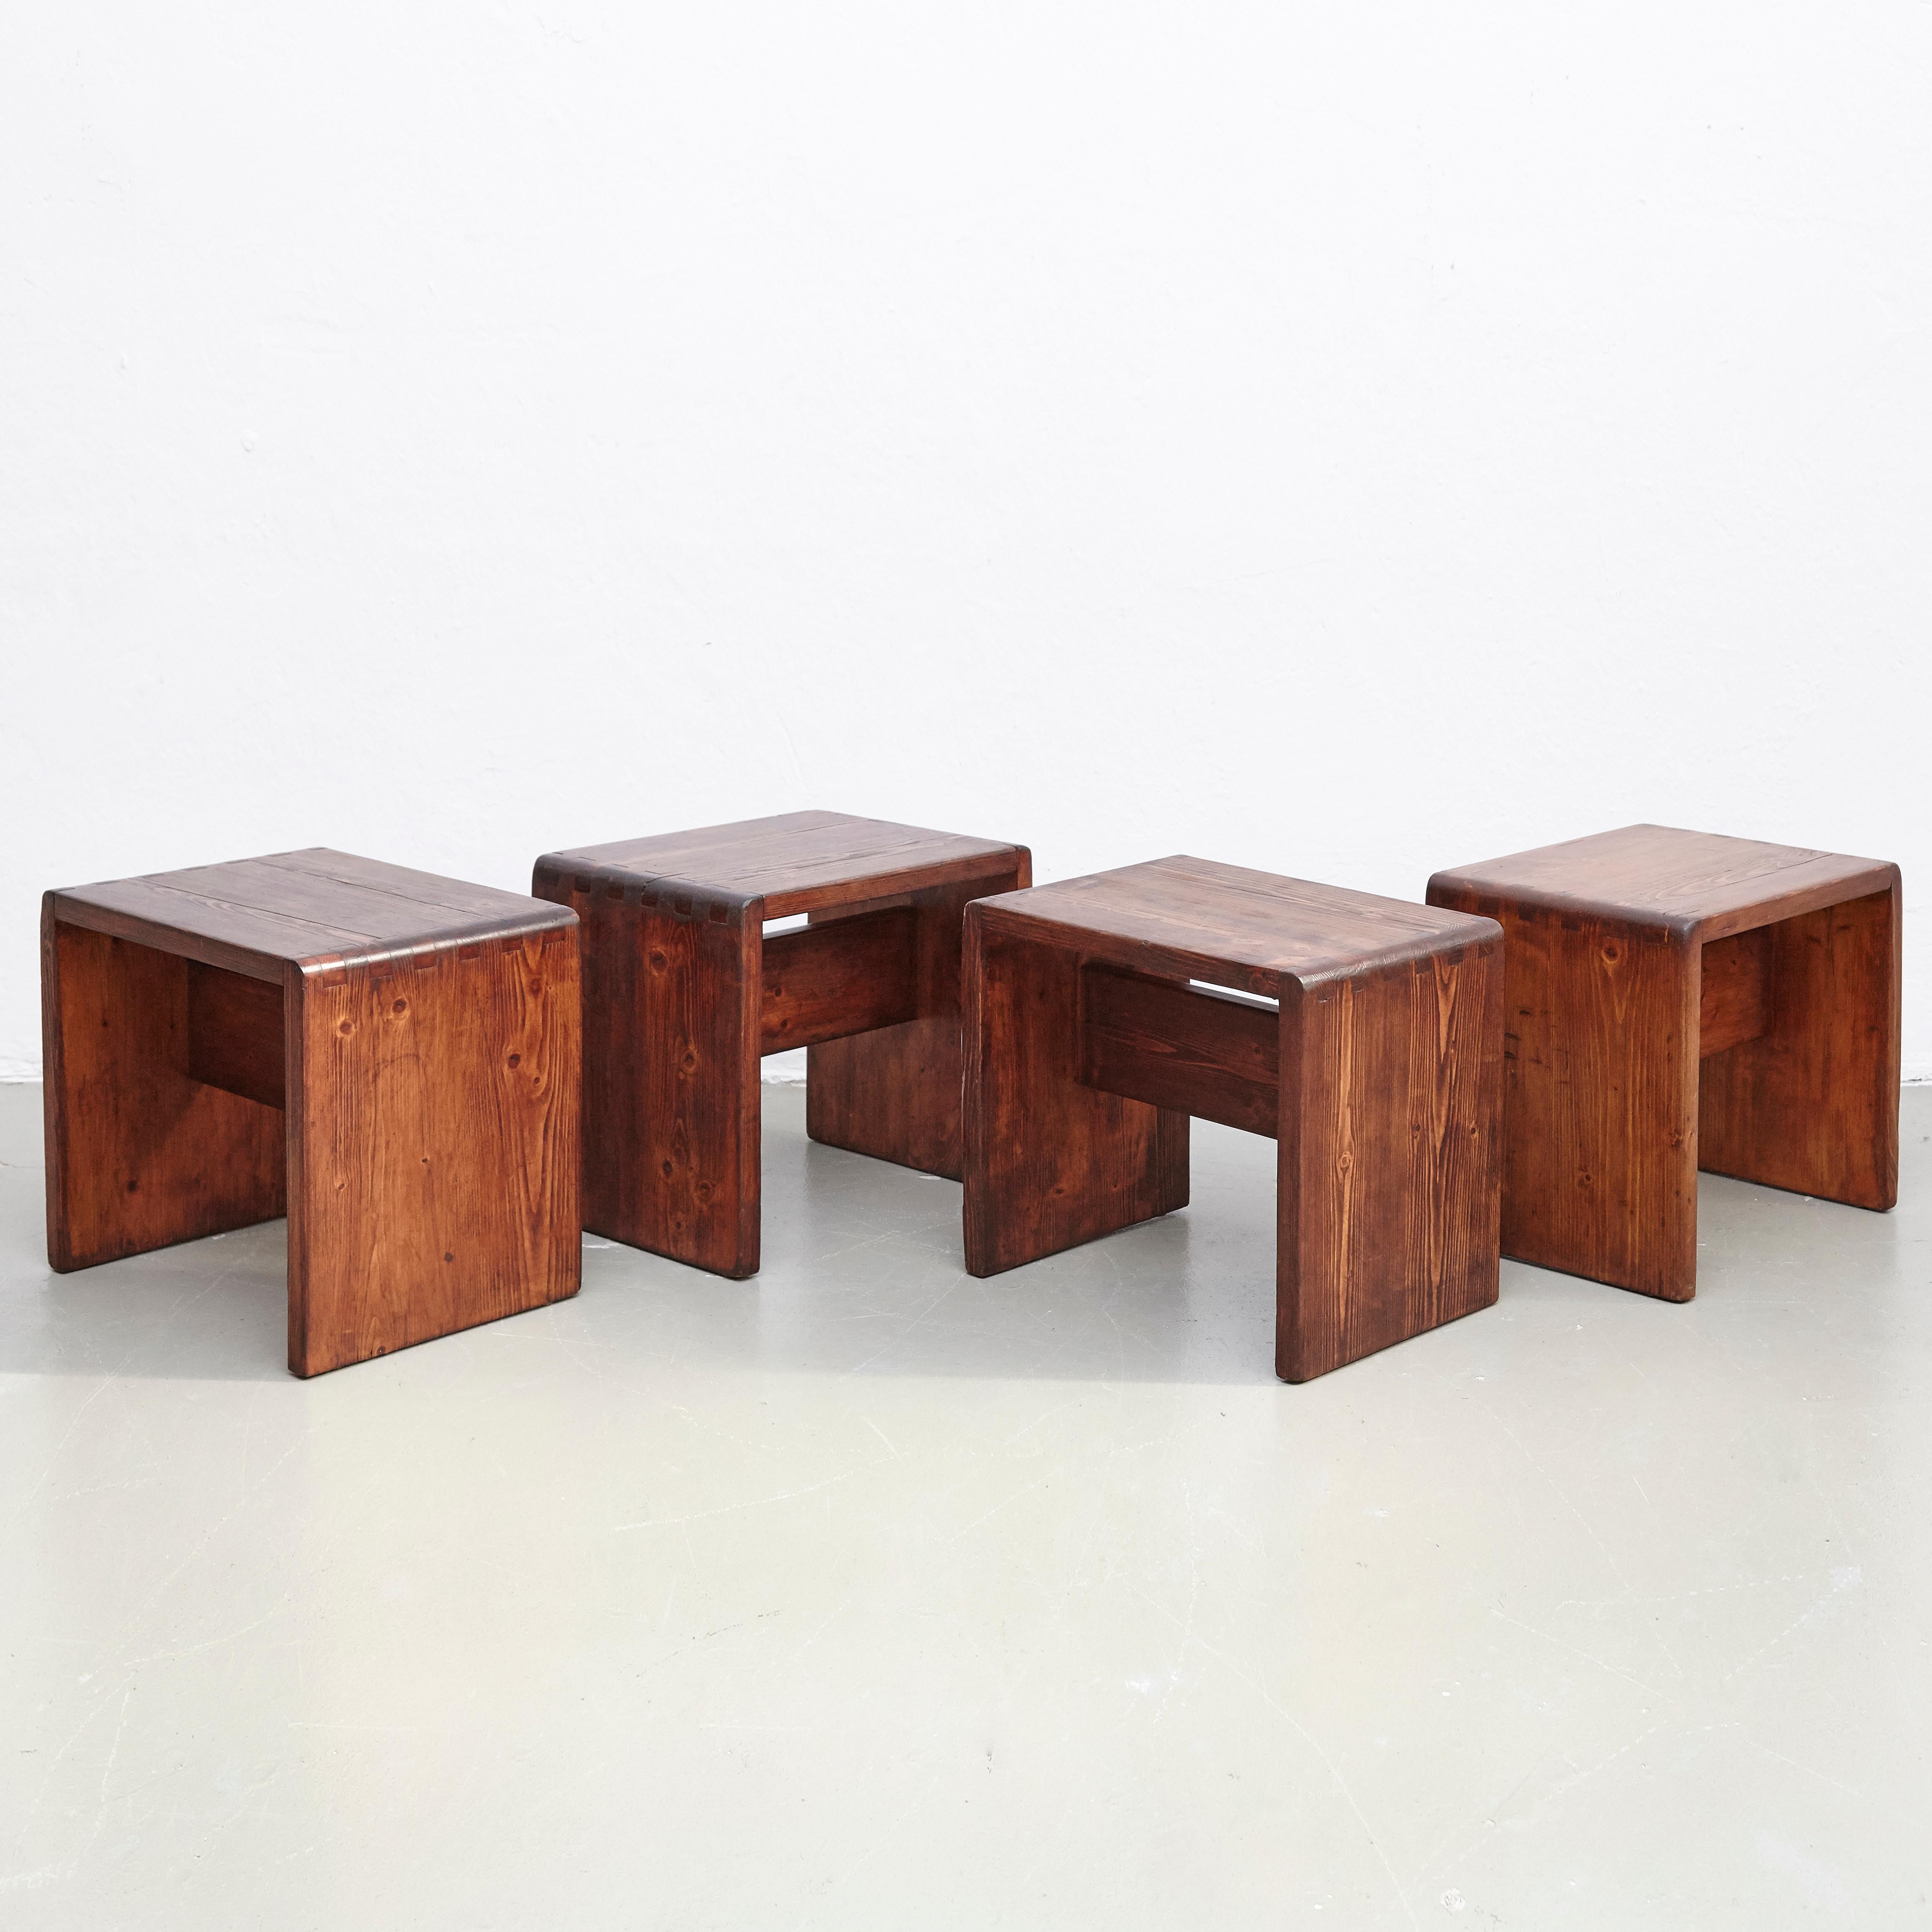 Stools designed by Charlotte Perriand for Les Arcs ski Resort, circa 1960, manufactured in France.
Pine wood.

In good original condition, with minor wear consistent with age and use, preserving a beautiful patina.

Charlotte Perriand (1903 -